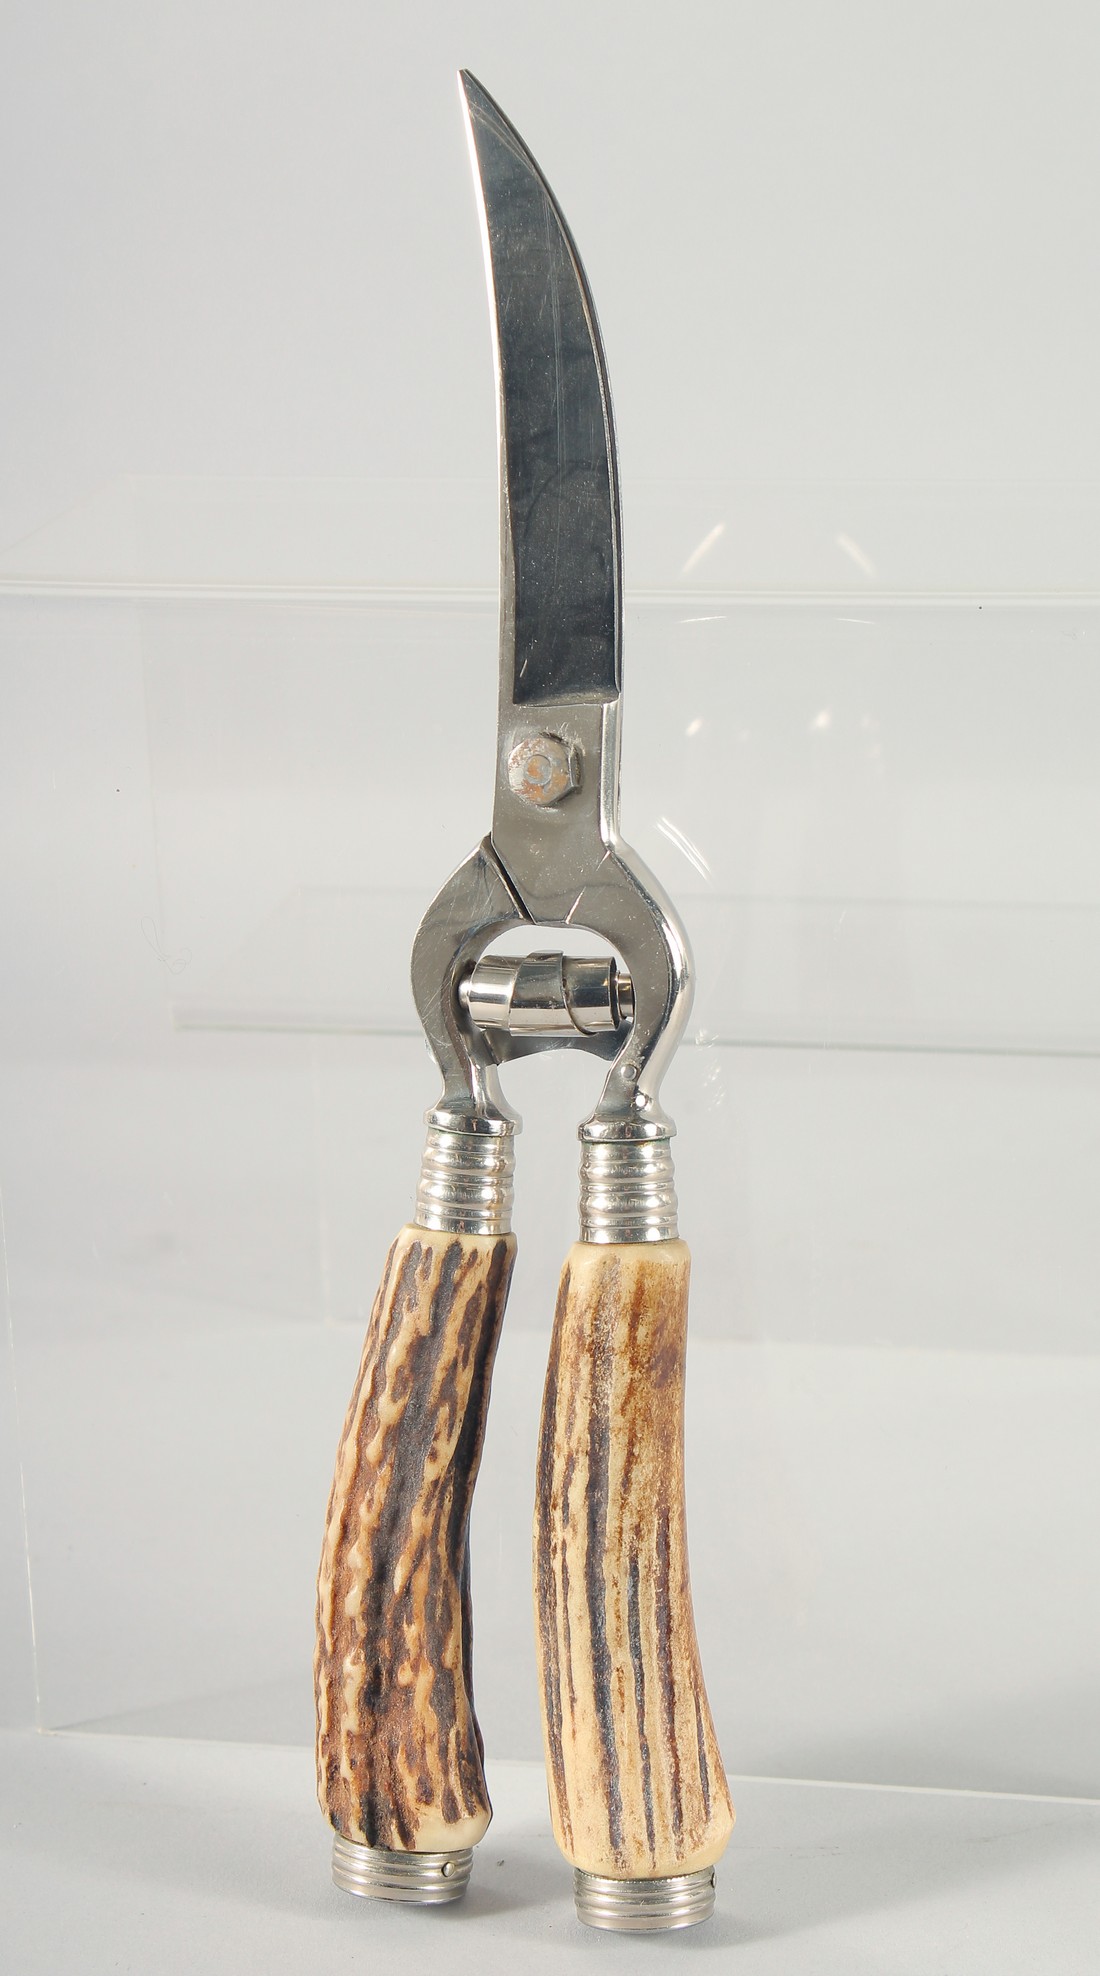 L and S SOLINGEN, a pair of antler handled carving scissors.